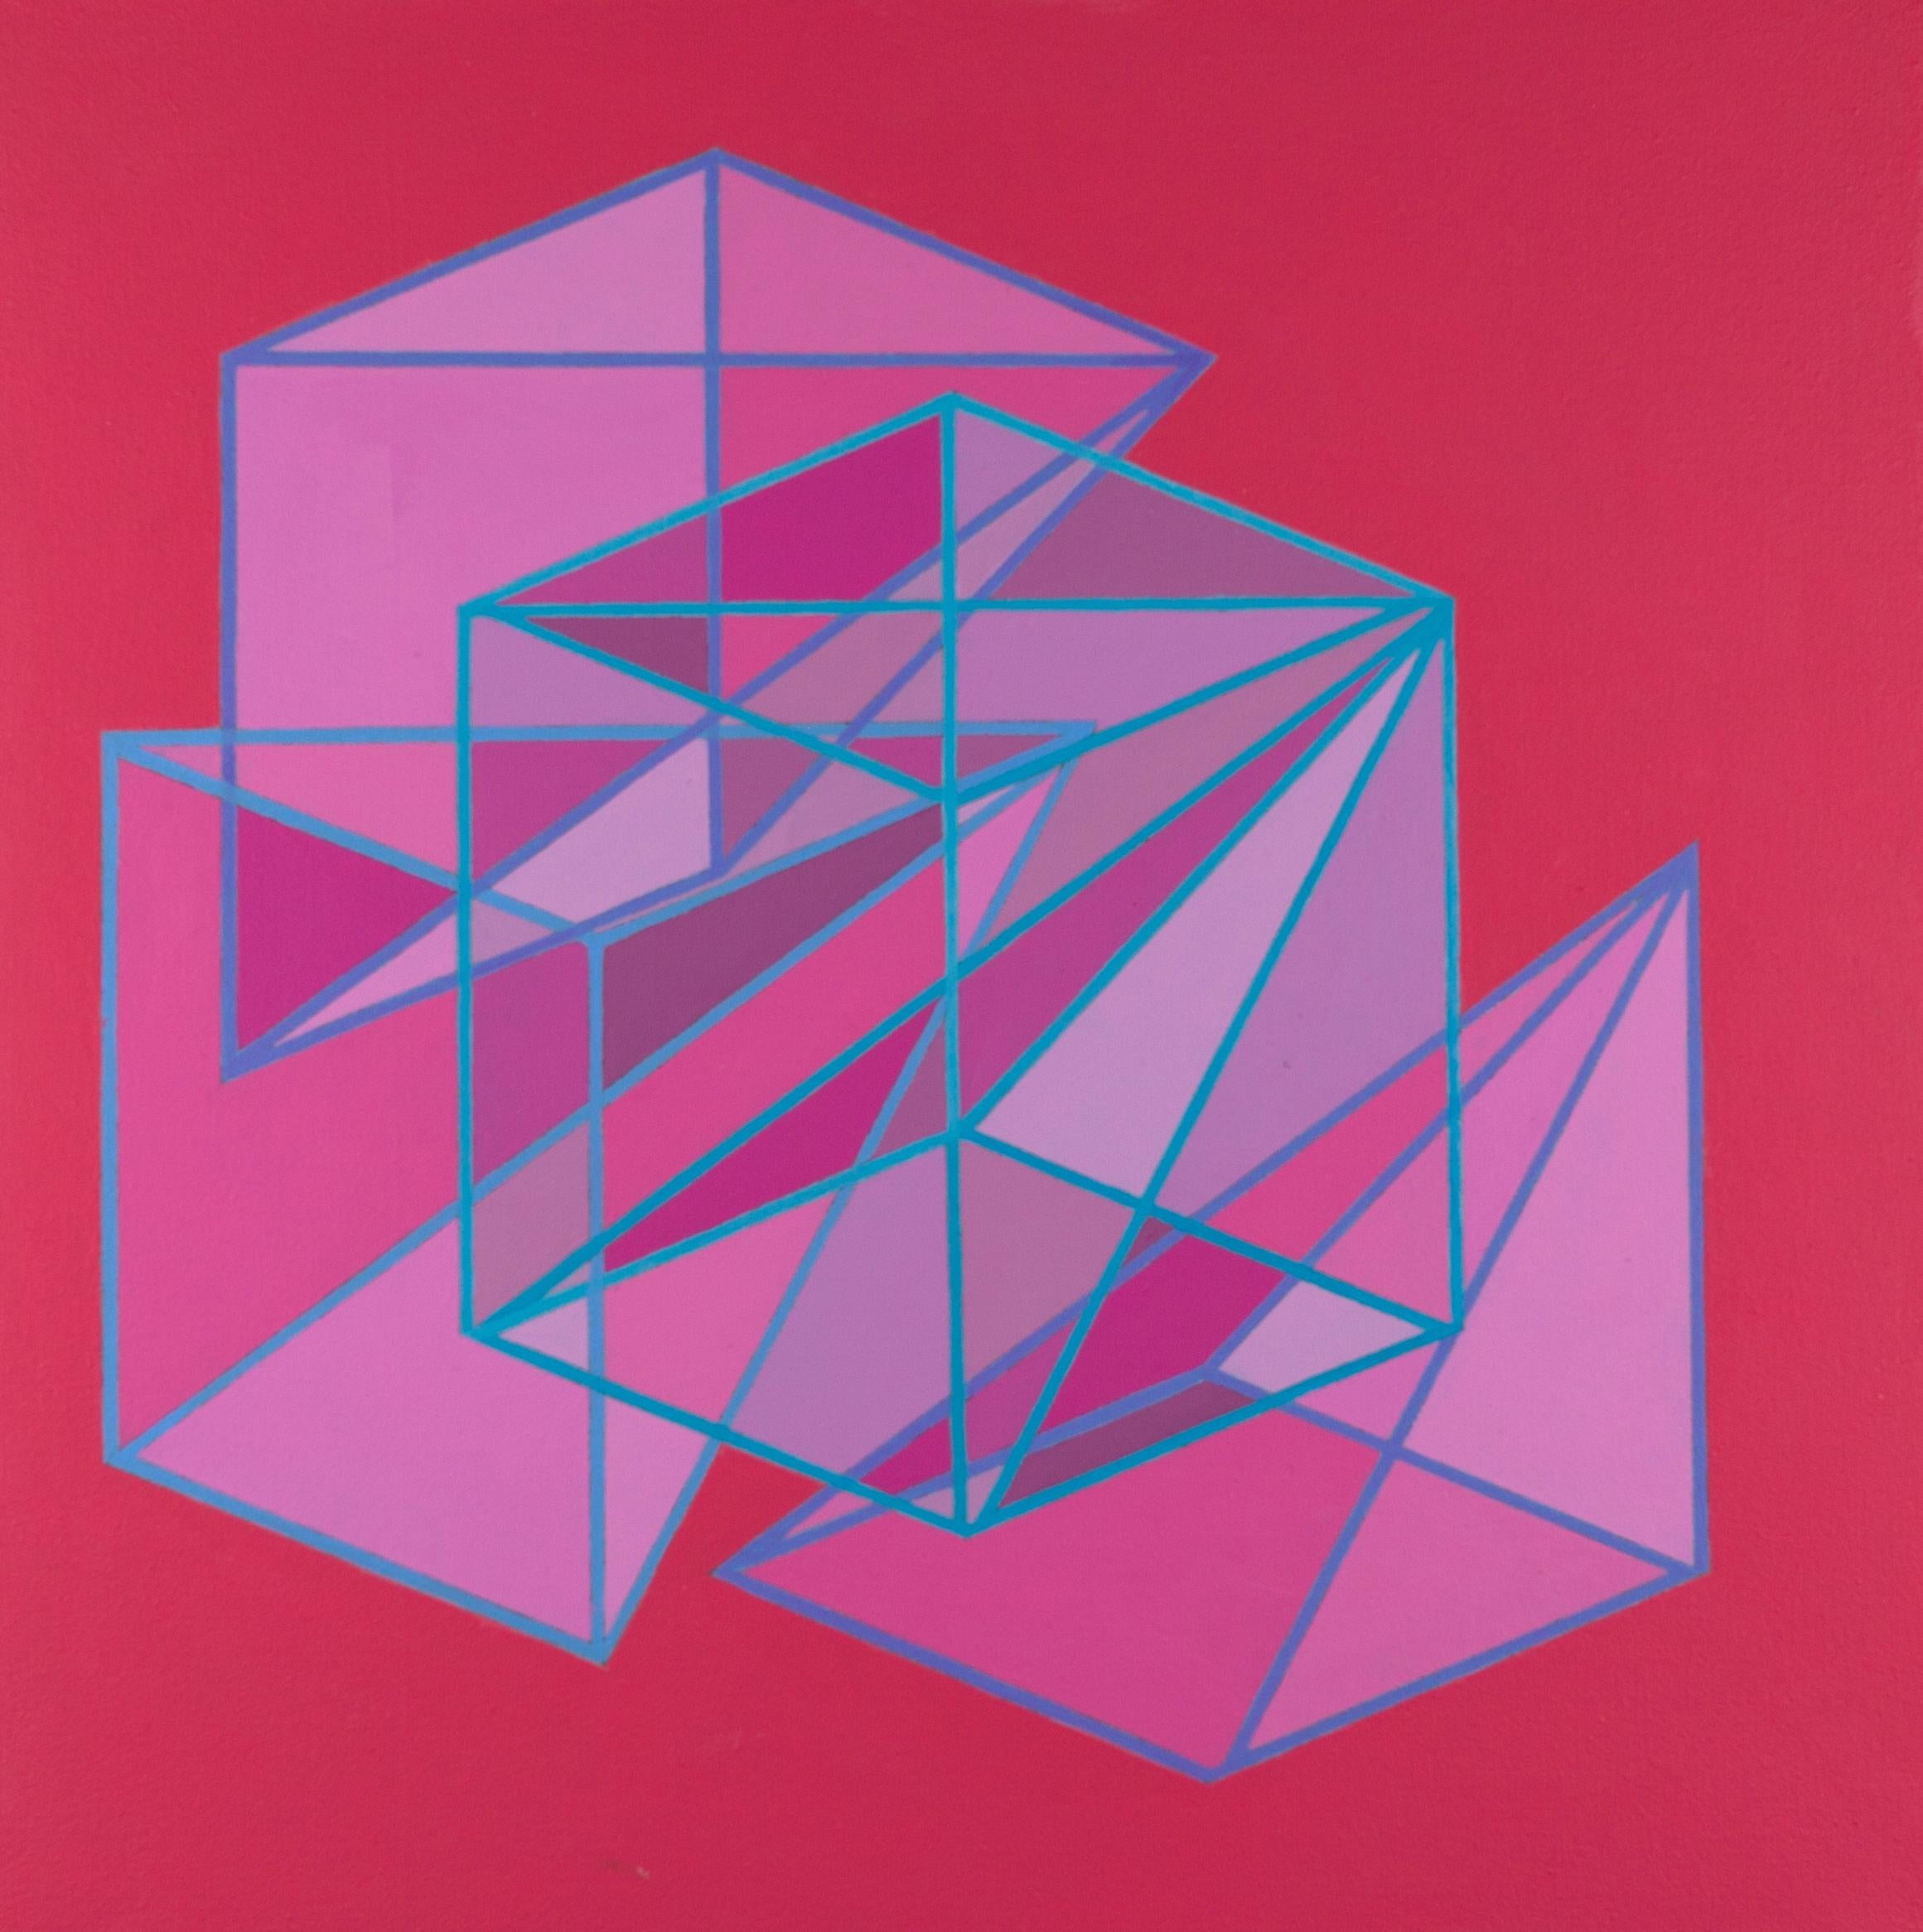 Benjamin Weaver Abstract Painting - Geometric abstract Op Art Pop Art painting in pink & red w/ cubes & triangles